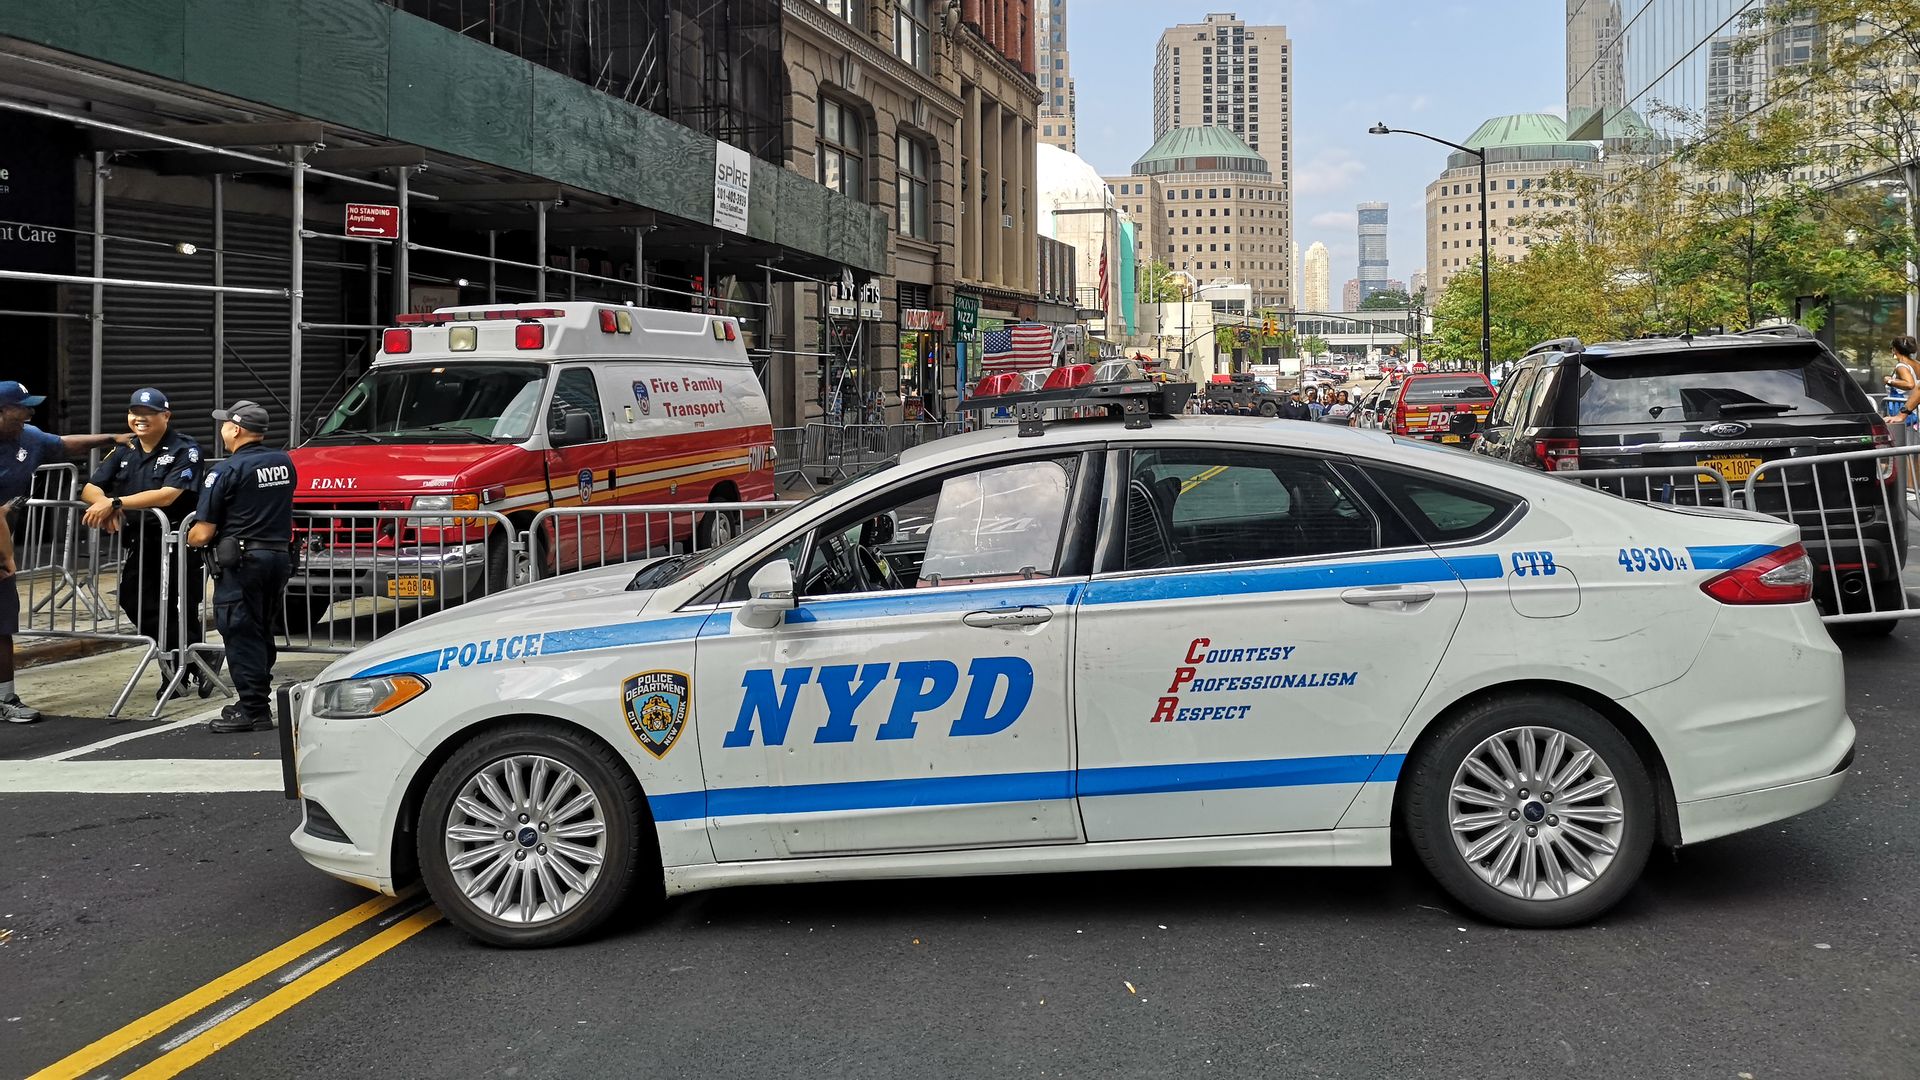 An NYPD car.